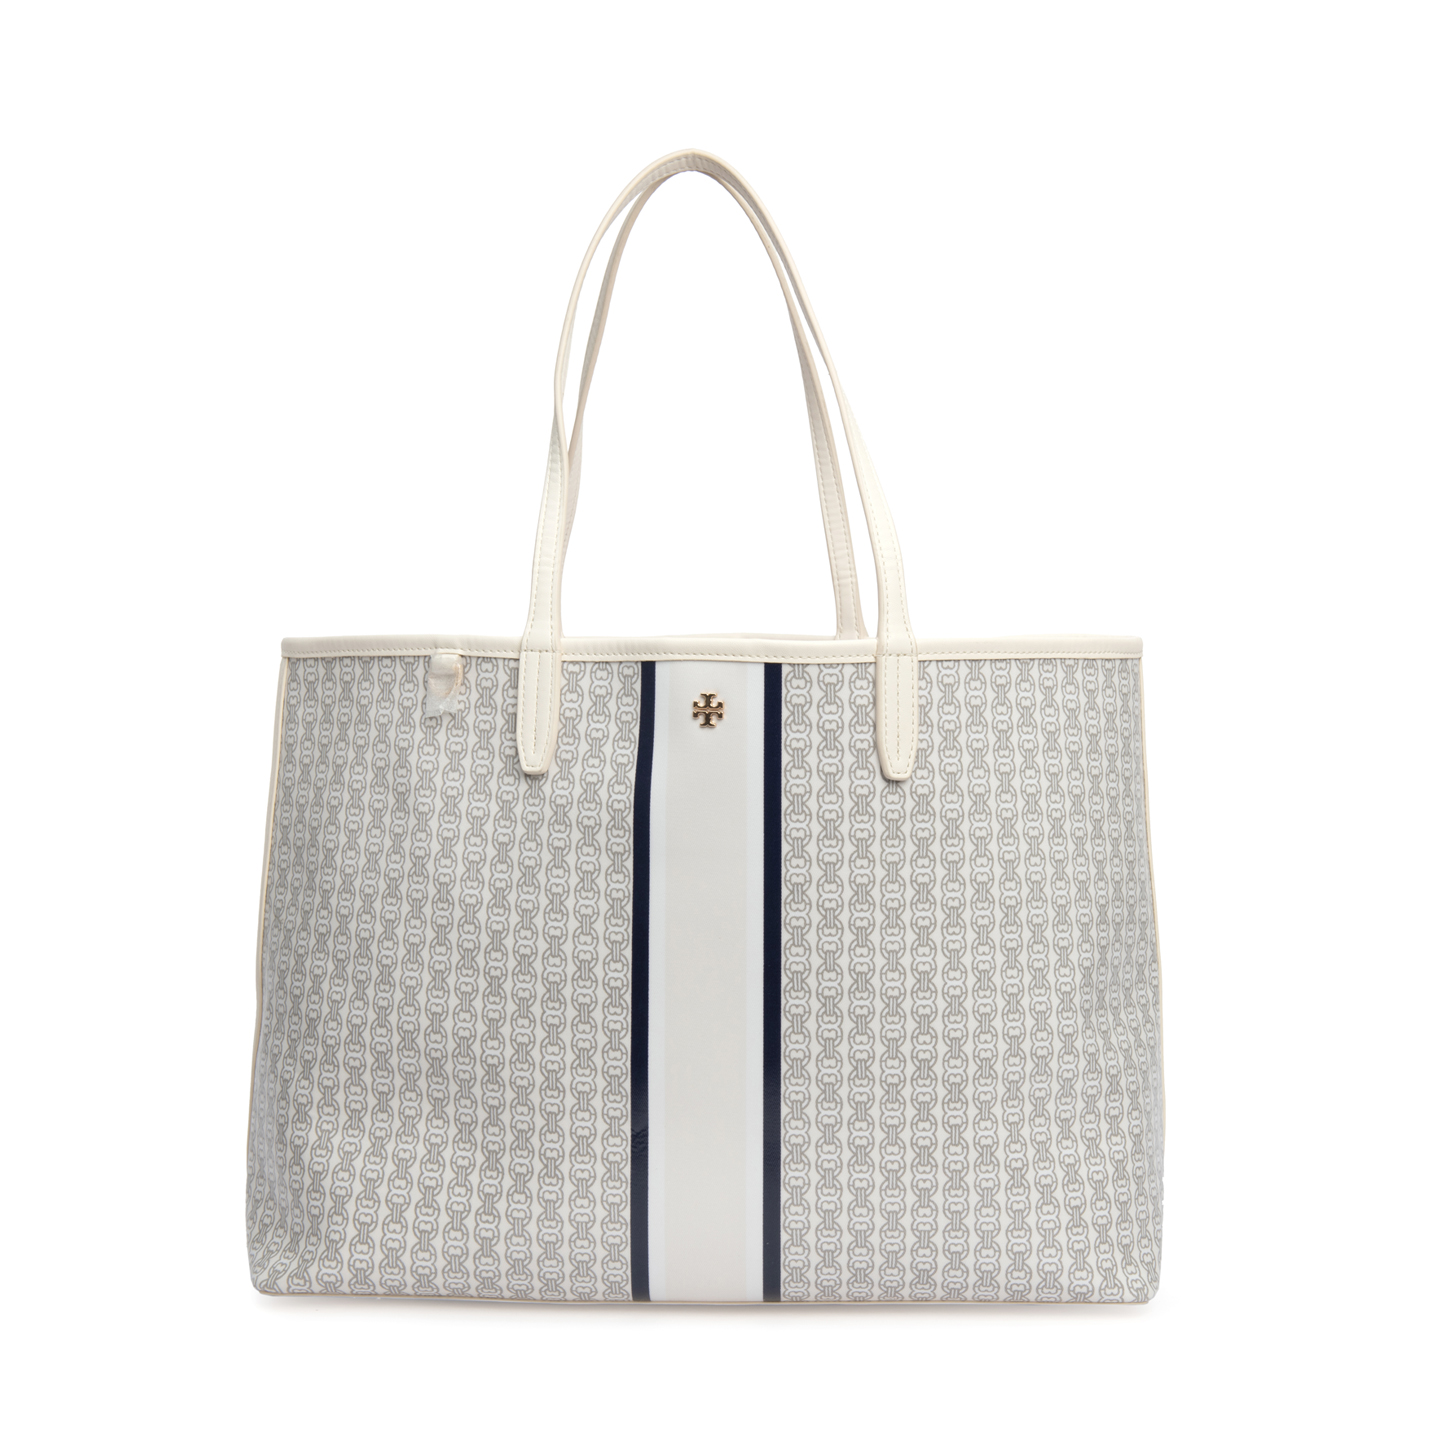 Tory Burch Gemini Link Tote Bag, New Ivory - LabelCentric